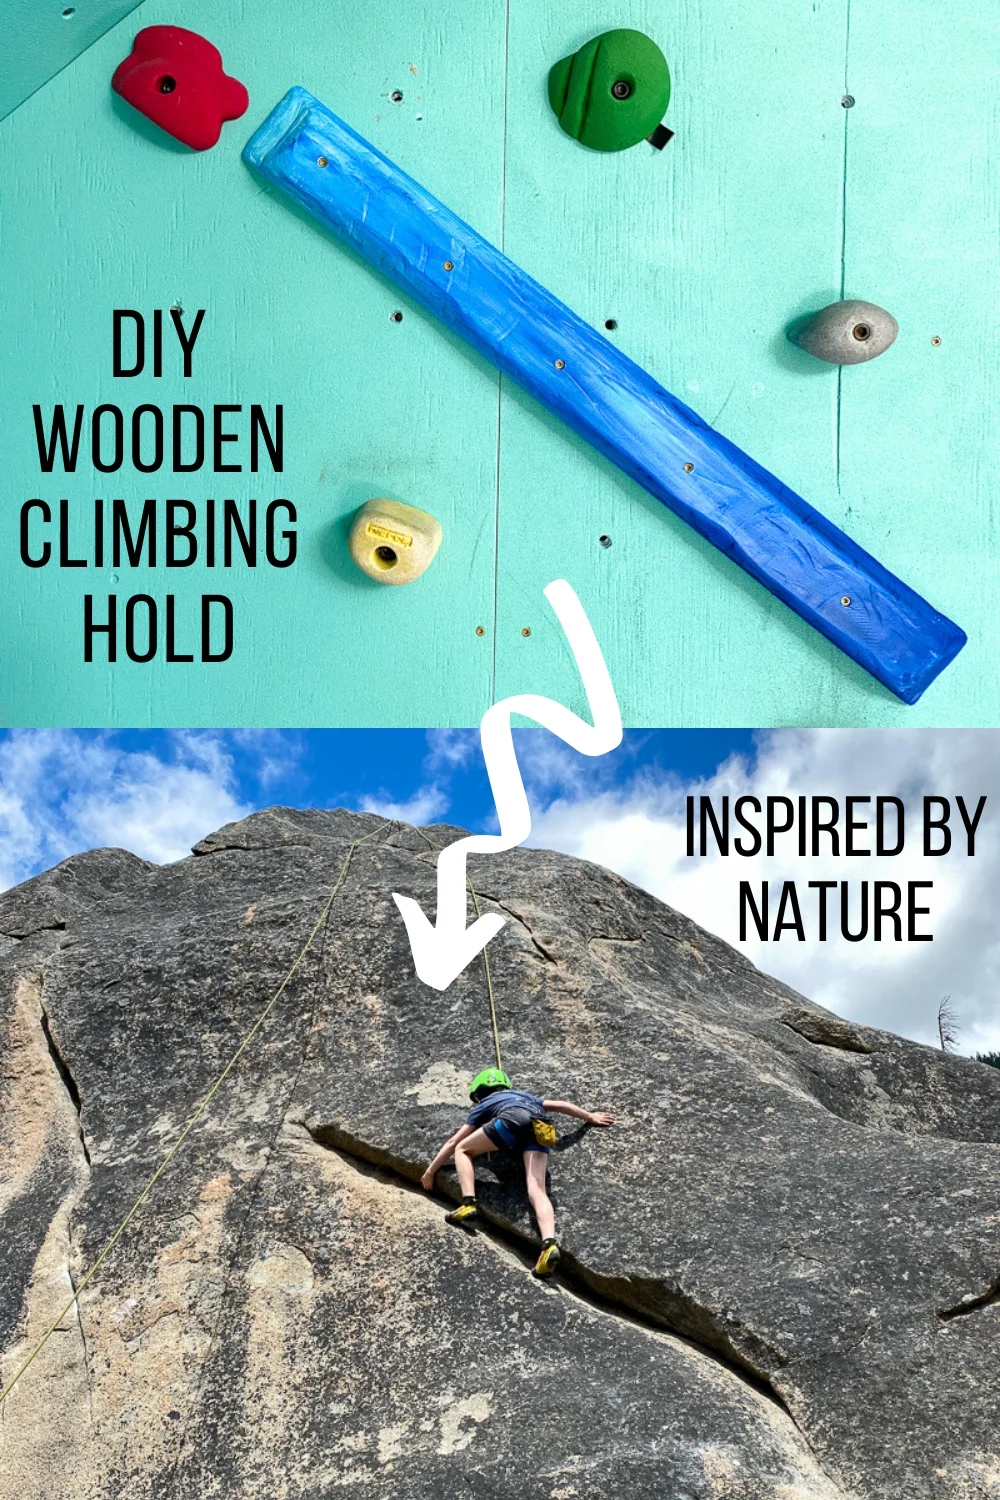 DIY wooden climbing hold inspired by nature